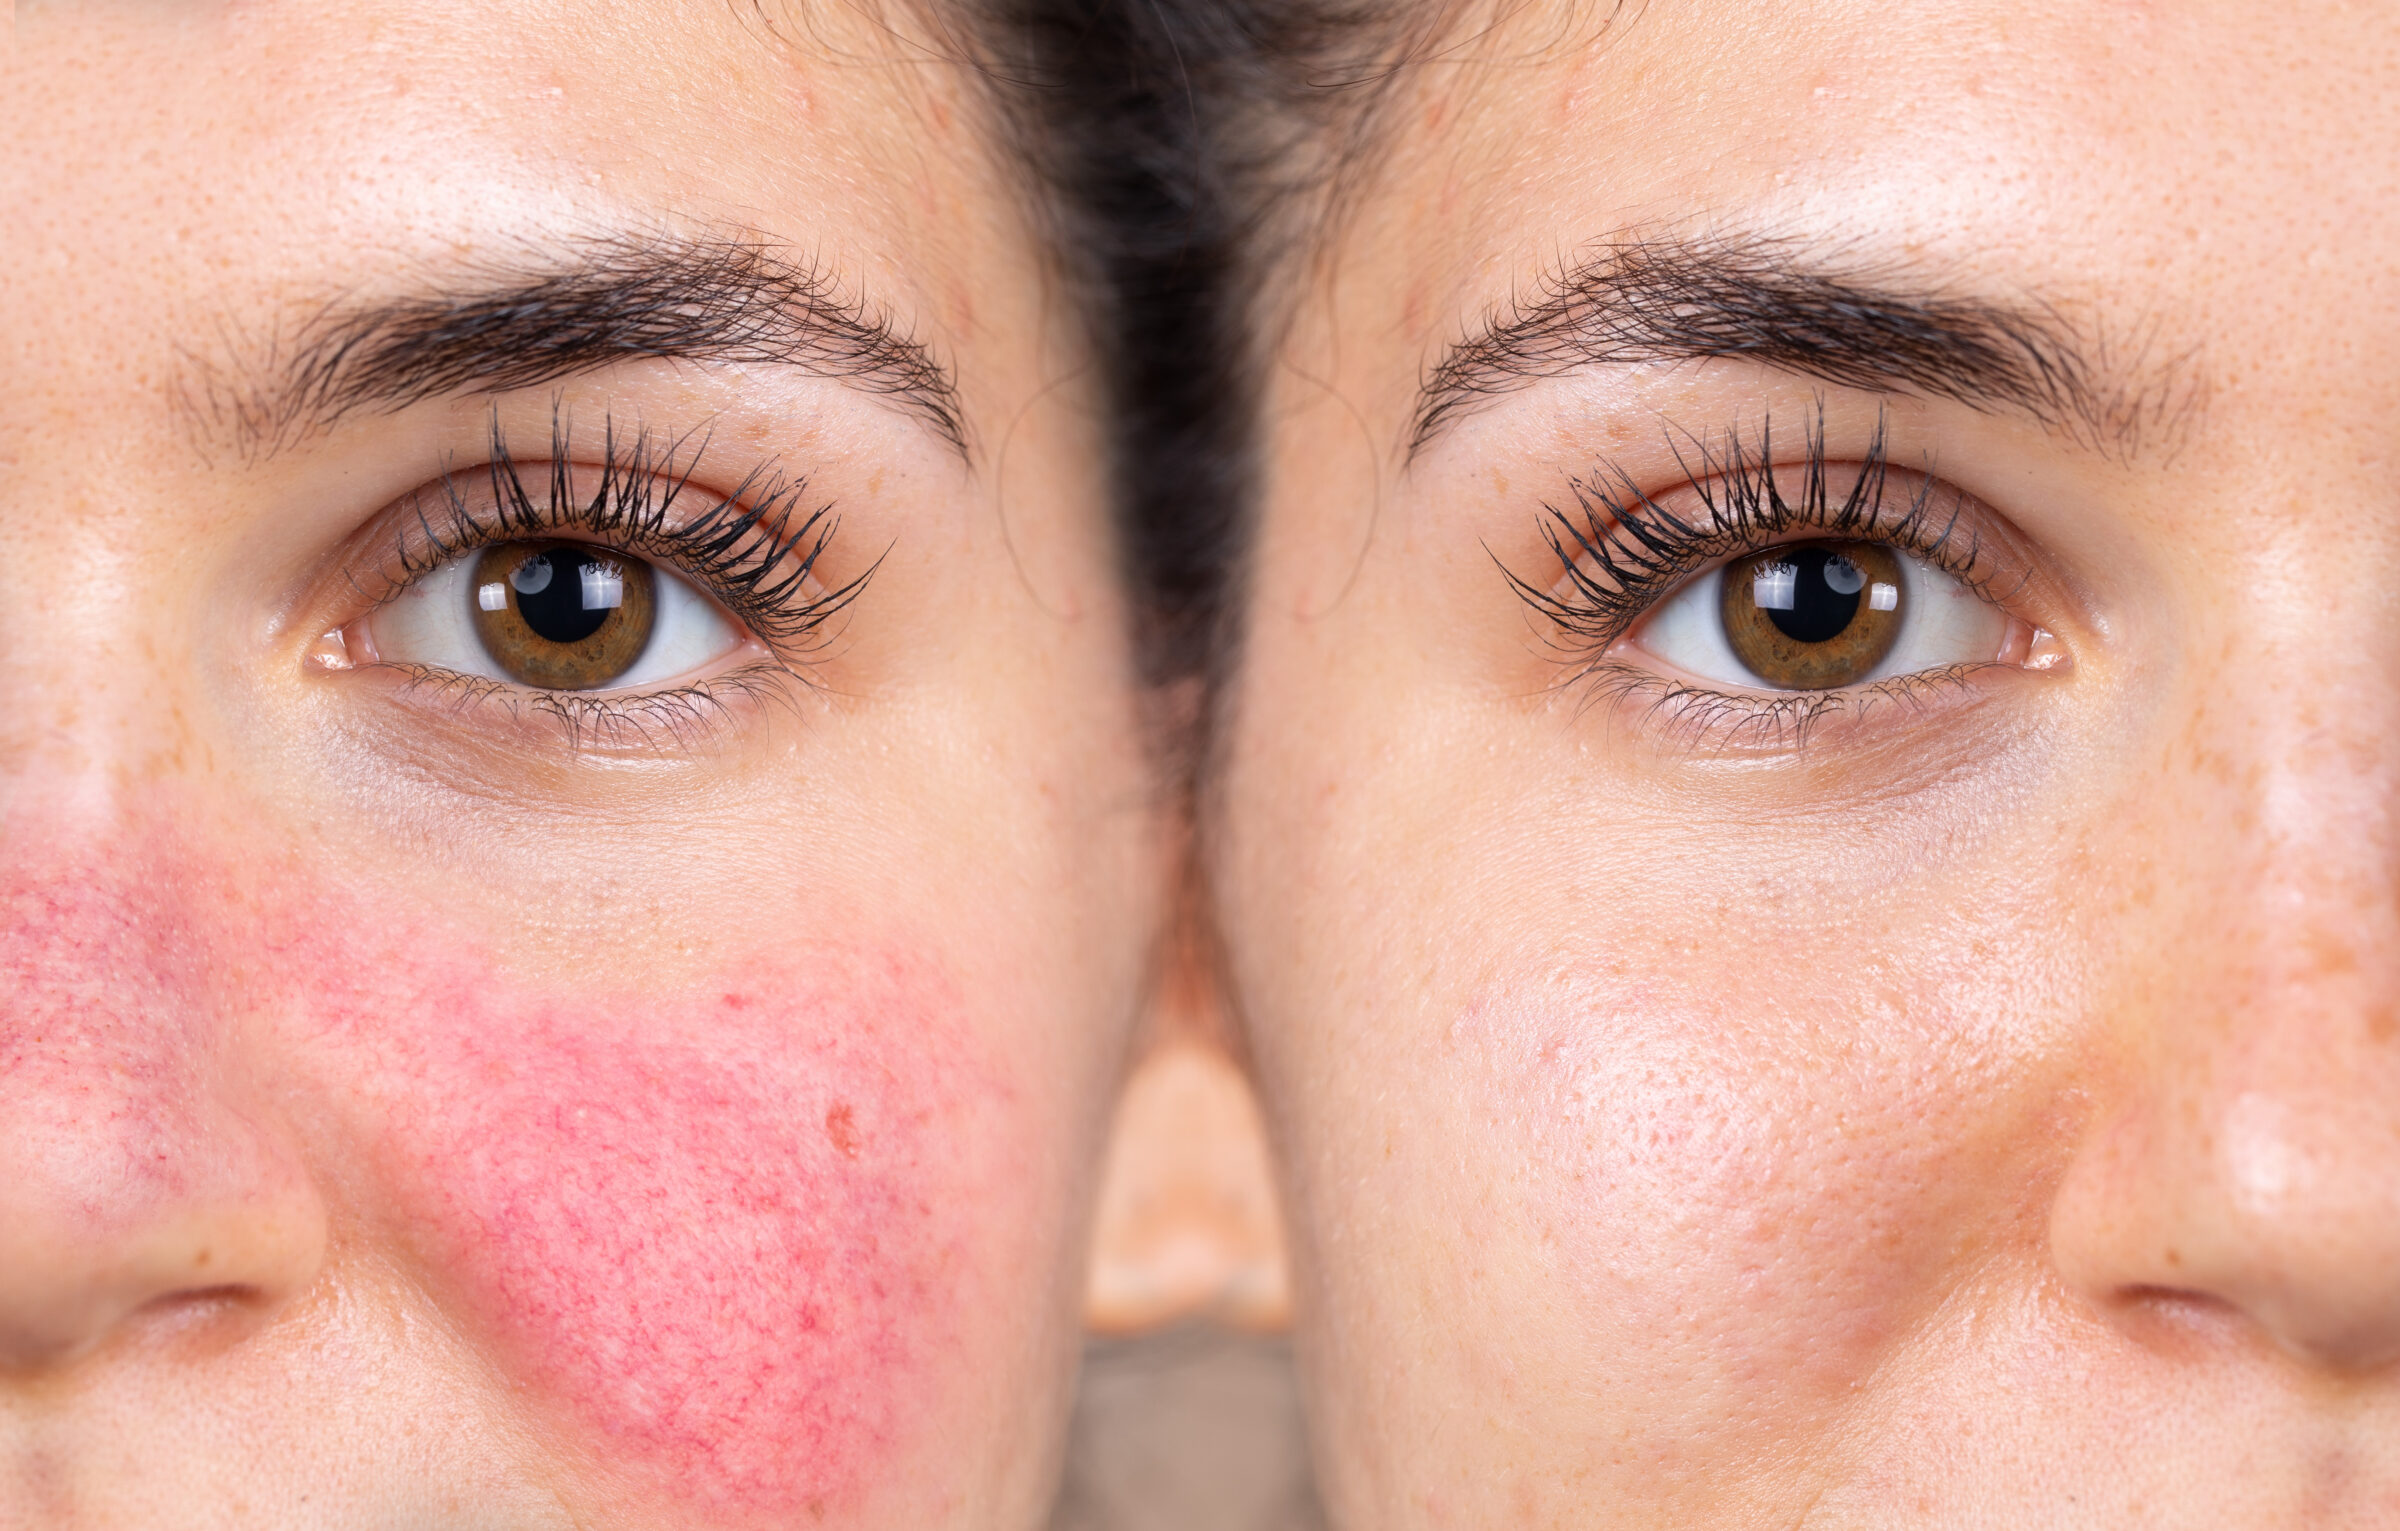 A woman's face before and after Rosacea treatment